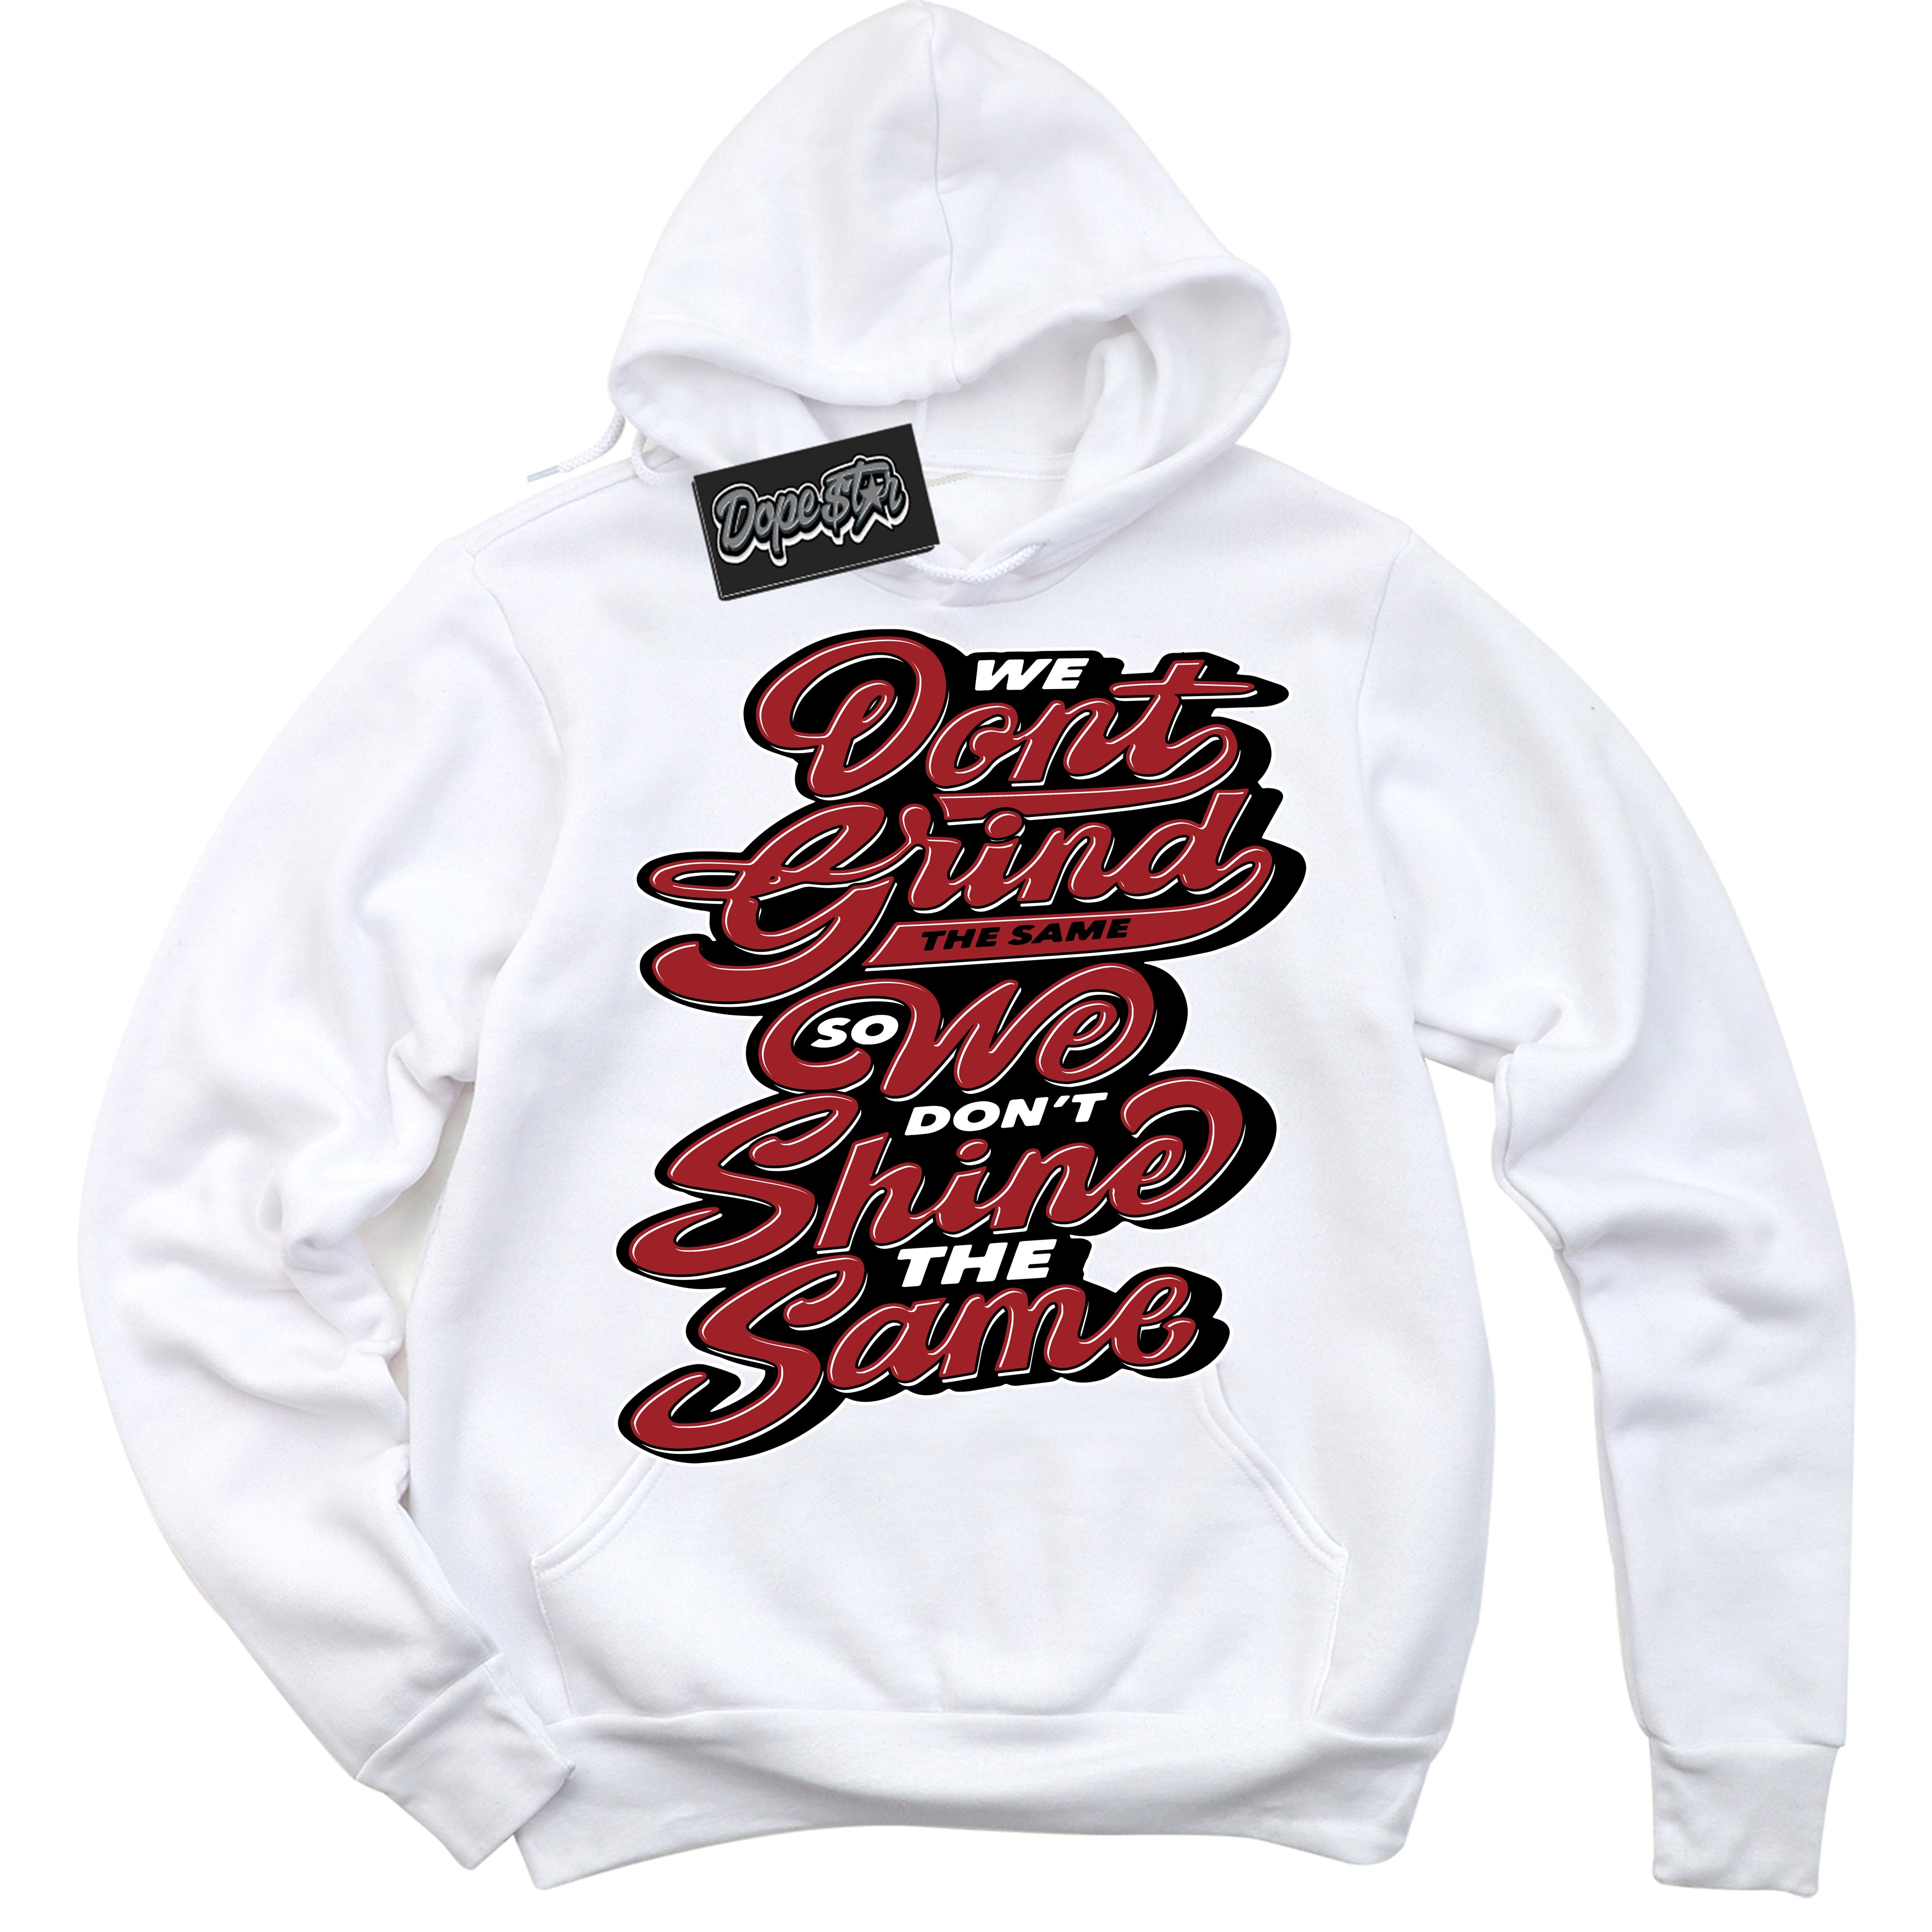 Cool White Hoodie With “ Grind Shine “  Design That Perfectly Matches Lost And Found 1s Sneakers.